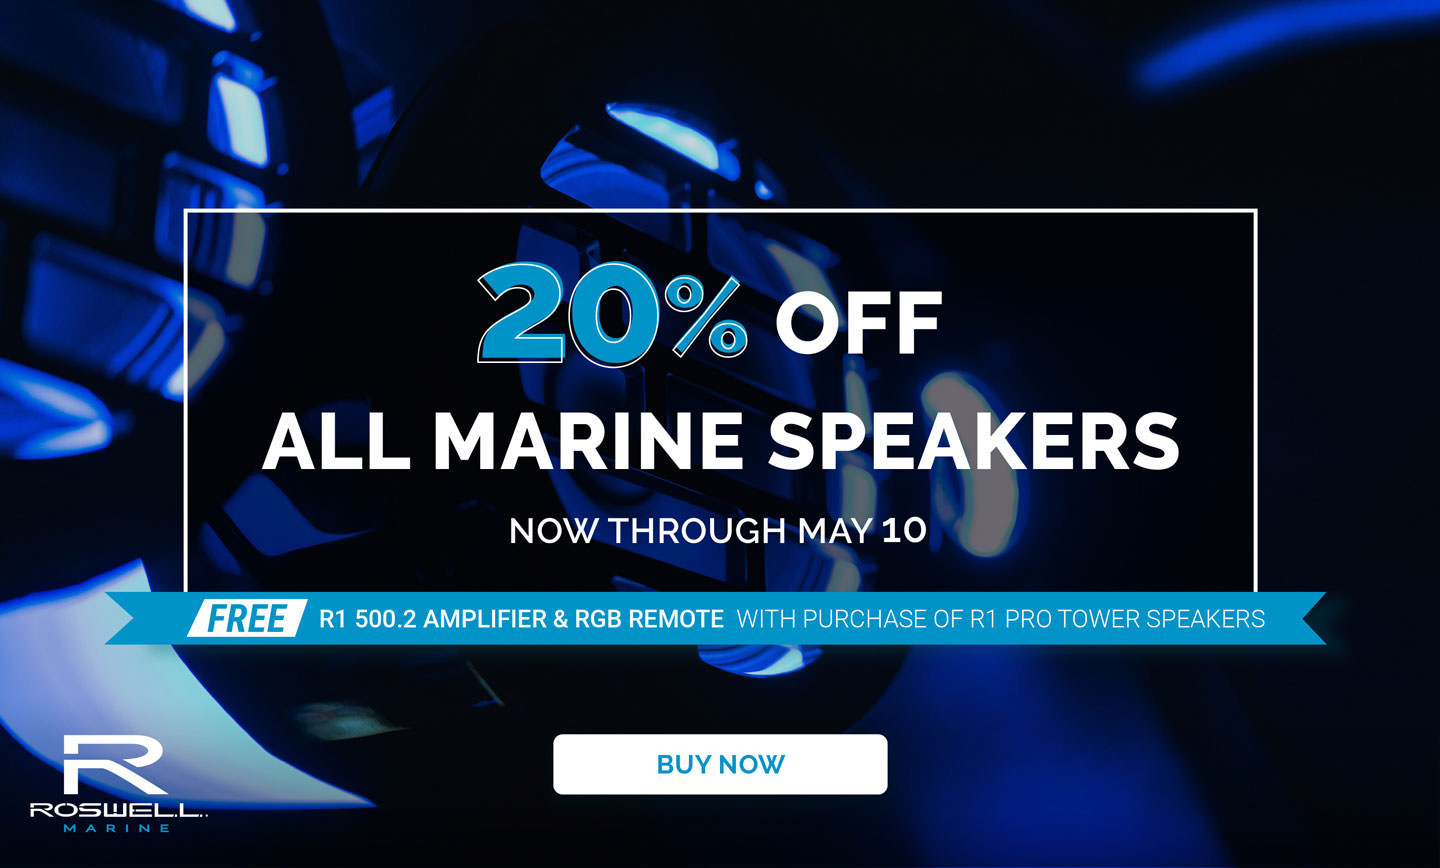 20% Off All Marine Speakers! Now Through May 10. FREE R1 500.2 Amplifier & RGB remote with purchase of R1 PRO Tower Speakers! Buy Now!